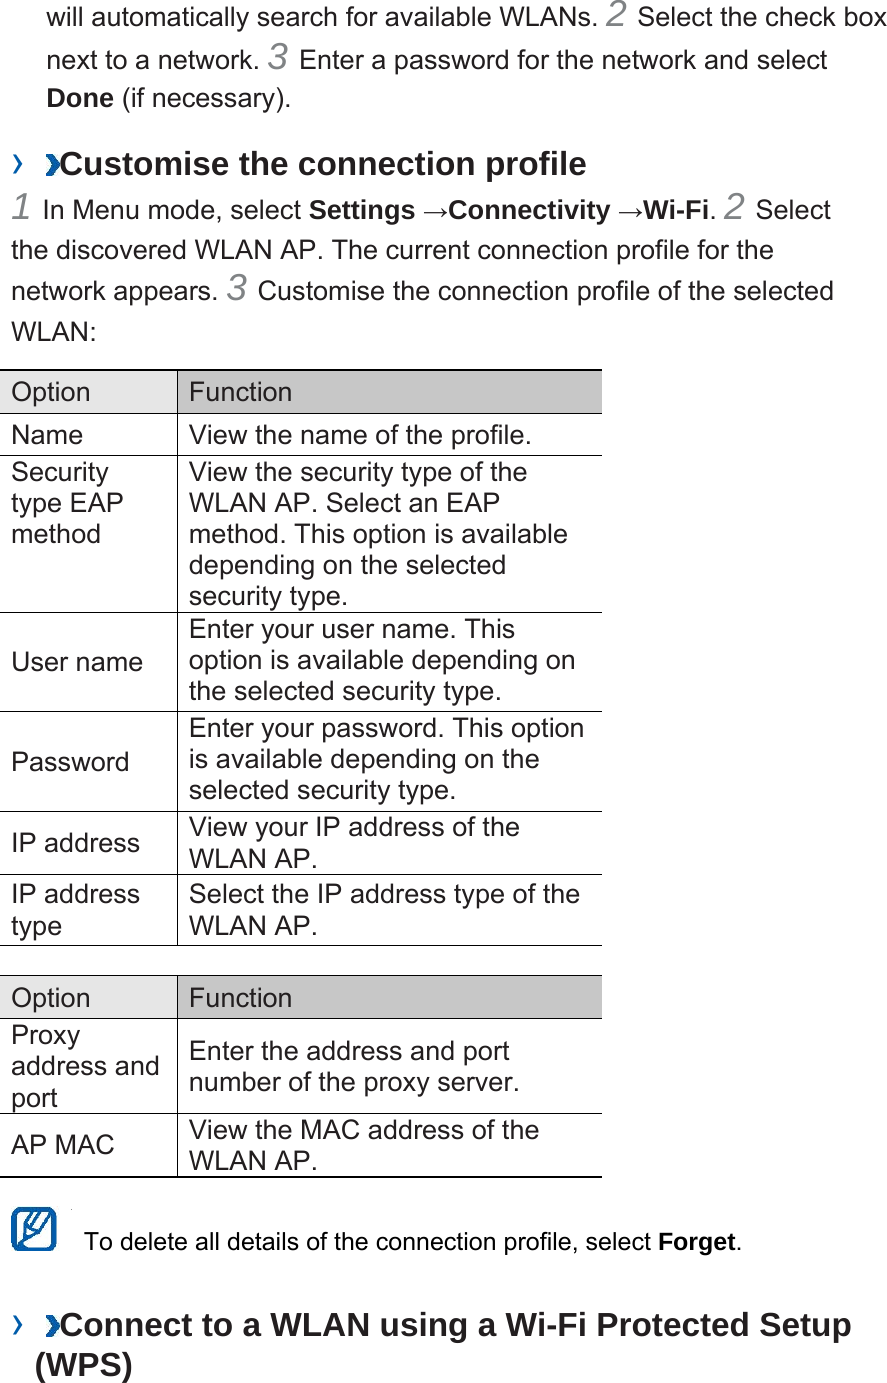 will automatically search for available WLANs. 2 Select the check box next to a network. 3 Enter a password for the network and select Done (if necessary).   ›  Customise the connection profile   1 In Menu mode, select Settings →Connectivity →Wi-Fi. 2 Select the discovered WLAN AP. The current connection profile for the network appears. 3 Customise the connection profile of the selected WLAN:  Option   Function  Name    View the name of the profile.   Security type EAP method  View the security type of the WLAN AP. Select an EAP method. This option is available depending on the selected security type.   User name   Enter your user name. This option is available depending on the selected security type.   Password  Enter your password. This option is available depending on the selected security type.   IP address    View your IP address of the WLAN AP.   IP address type  Select the IP address type of the WLAN AP.    Option   Function  Proxy address and port  Enter the address and port number of the proxy server.   AP MAC    View the MAC address of the WLAN AP.      To delete all details of the connection profile, select Forget.  ›  Connect to a WLAN using a Wi-Fi Protected Setup (WPS)   